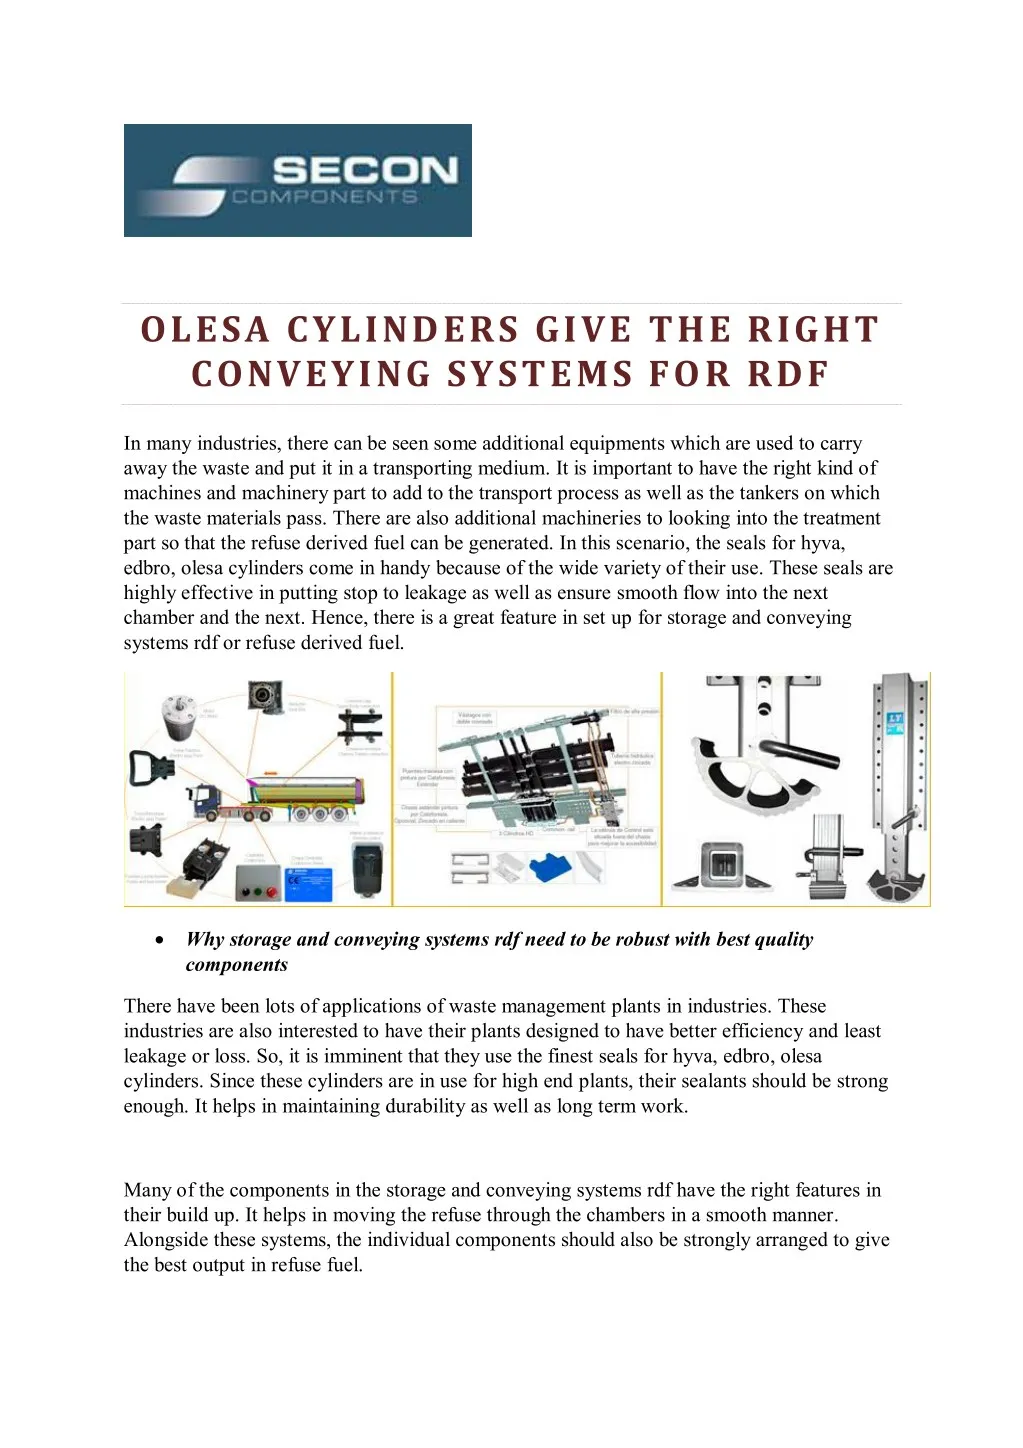 olesa cylinders give the right conveying systems